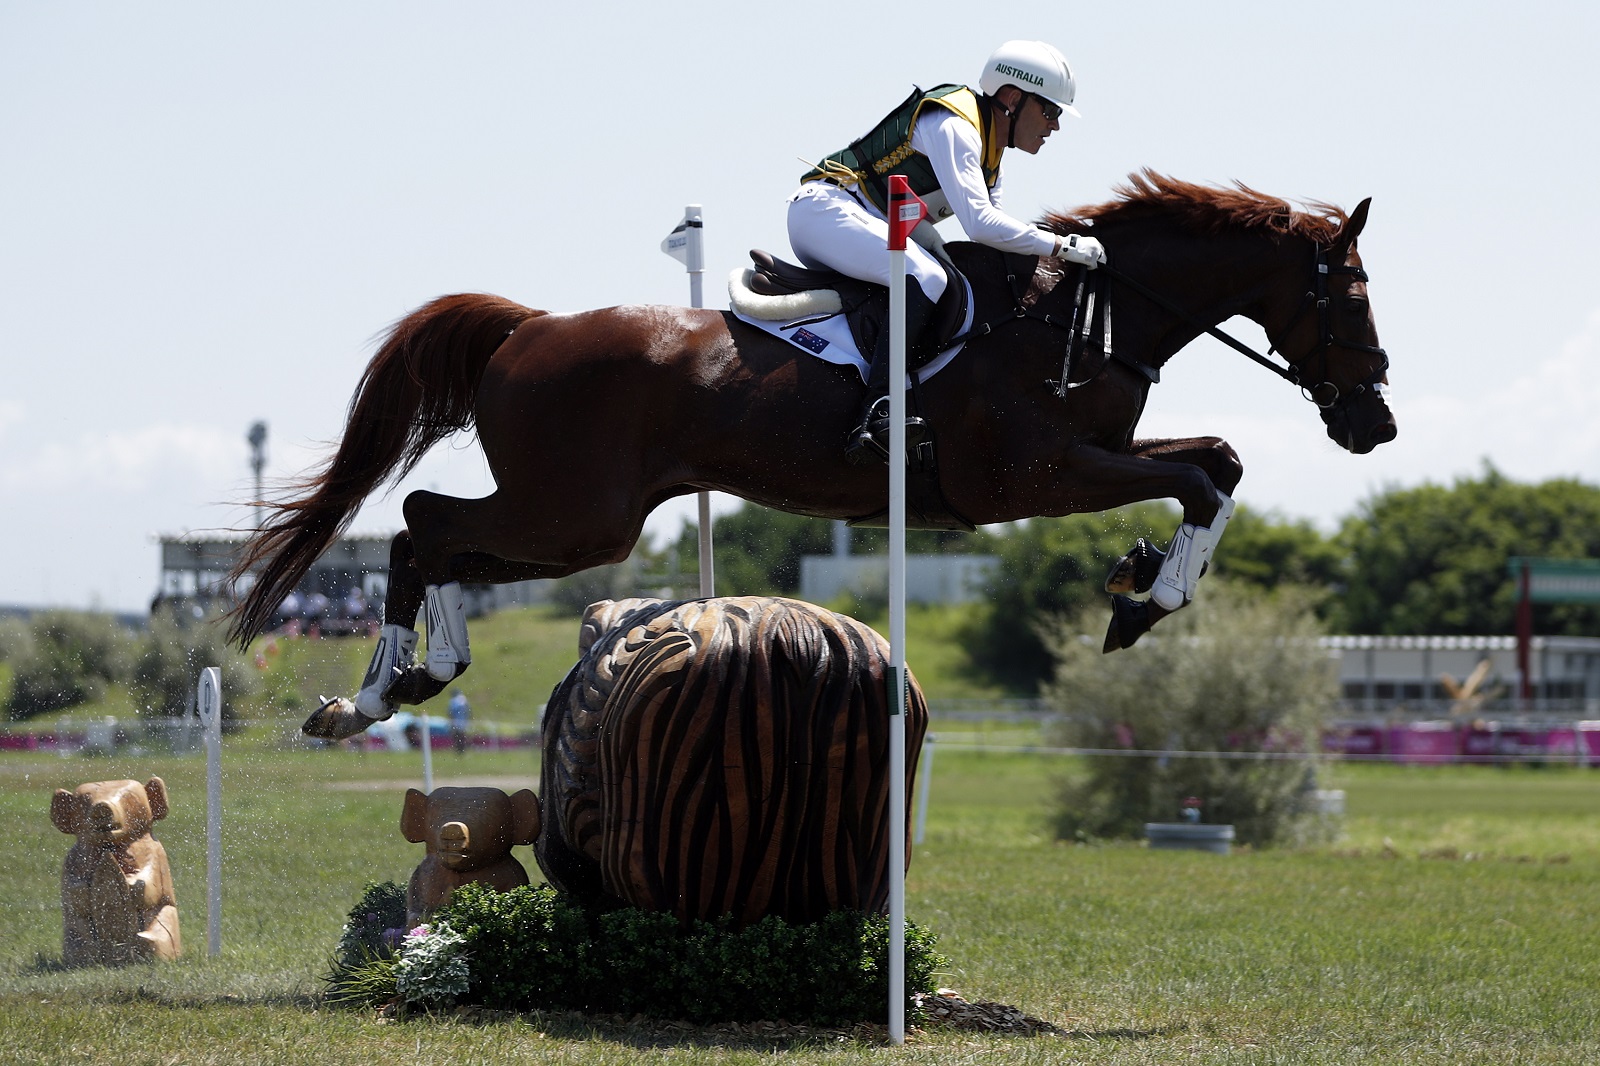 epa09384322 Andrew Hoy of Australia riding Vassily De Lassos competes in the Eventing Cross Country Team and Individual event of the Tokyo 2020 Olympic Games at the Sea Forest Cross Country Course in Tokyo, Japan, 01 August 2021.  EPA/KIYOSHI OTA